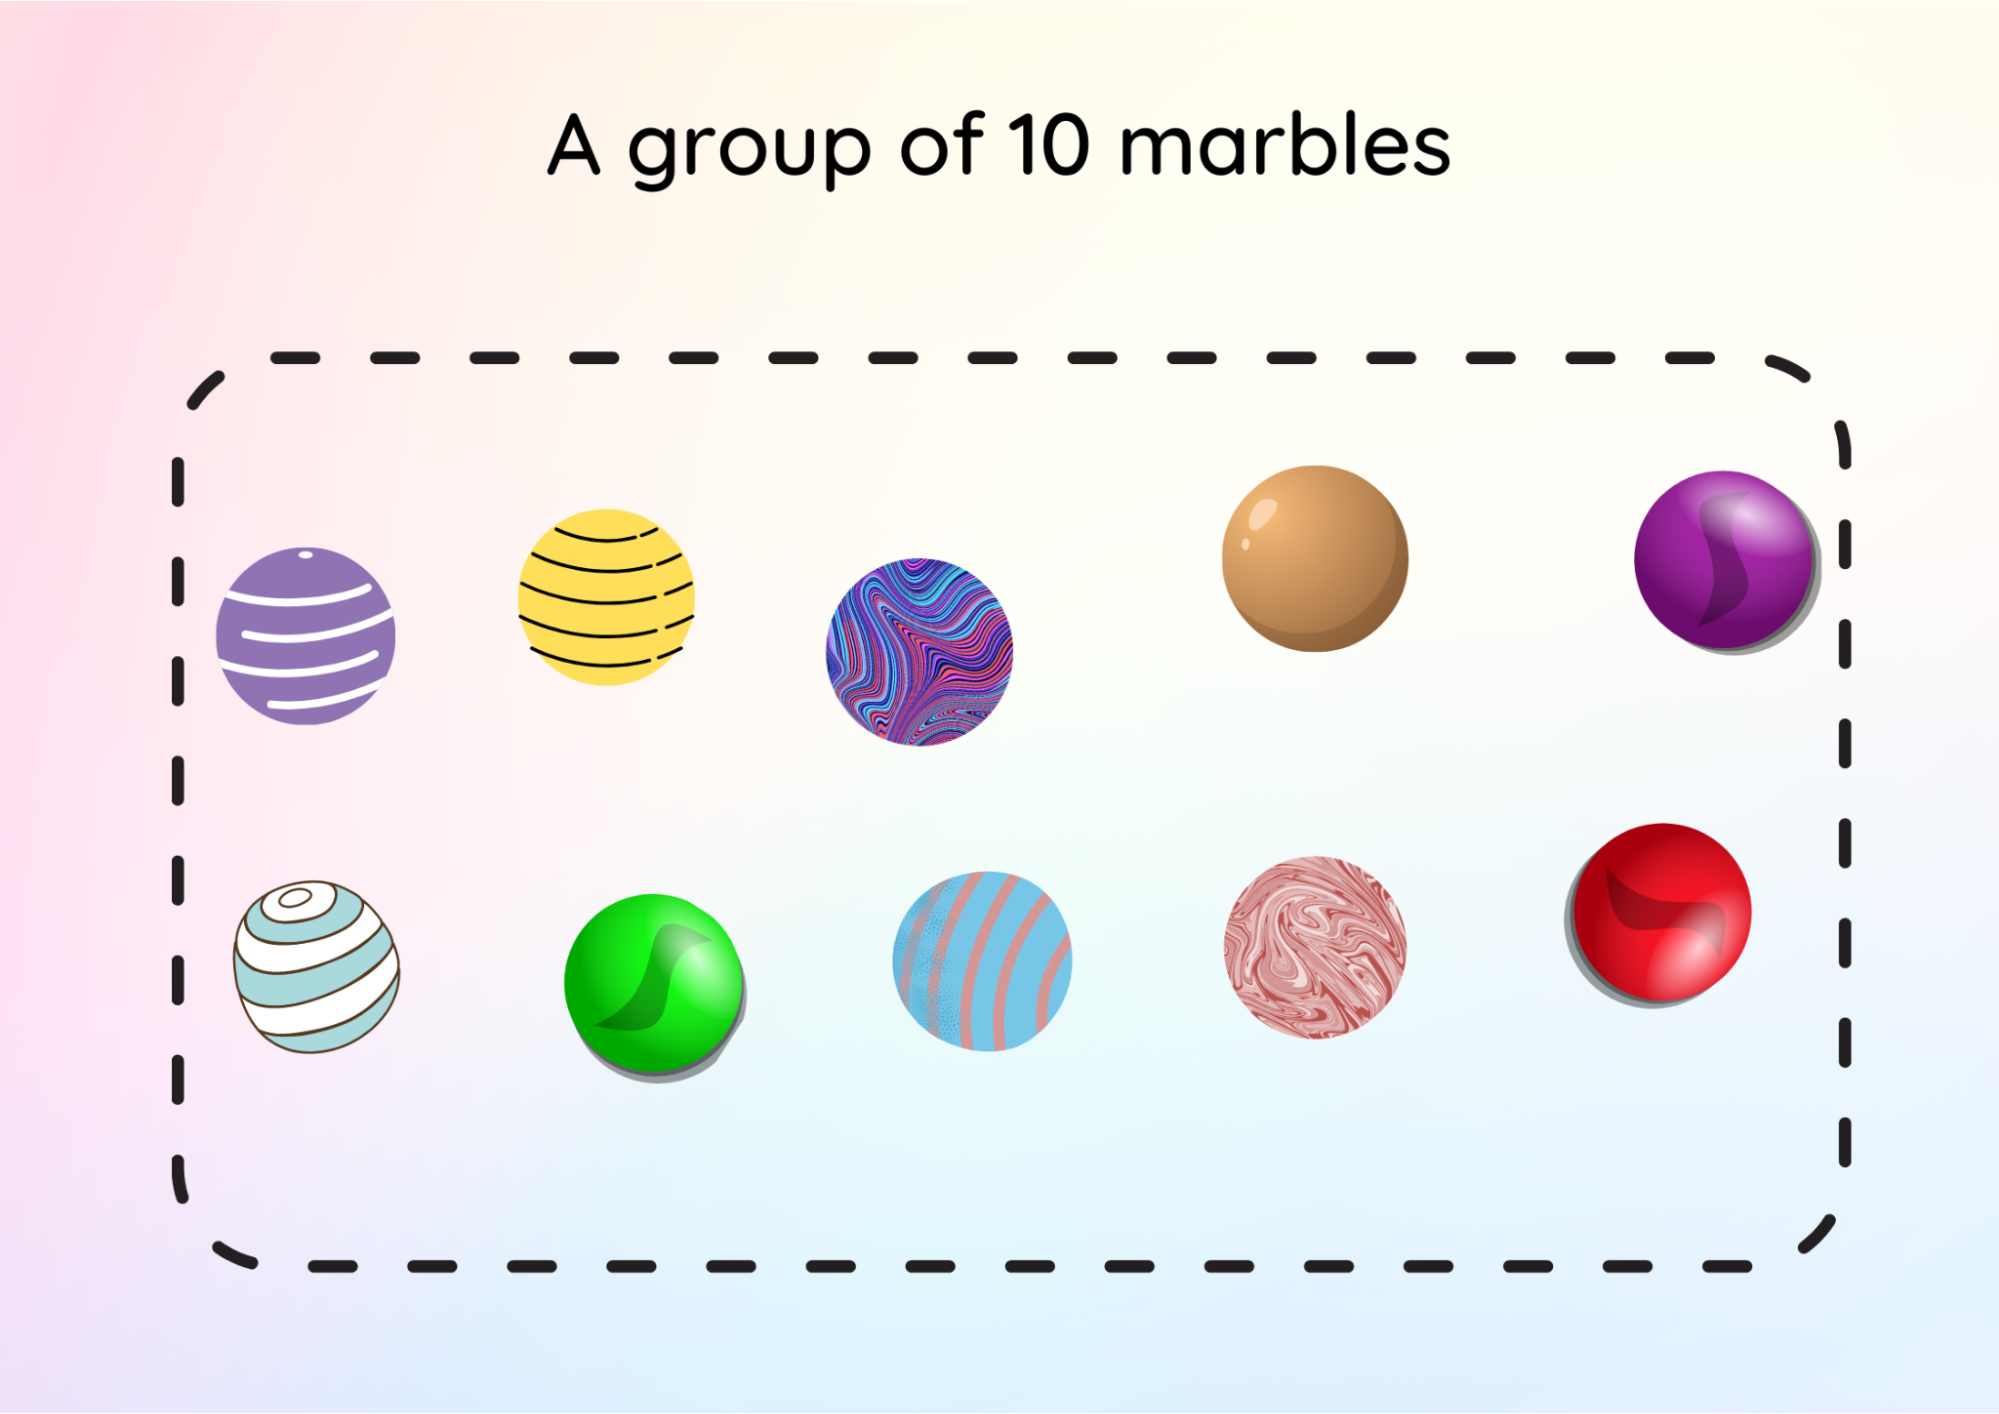 The Image Shows a Group of 10 Objects